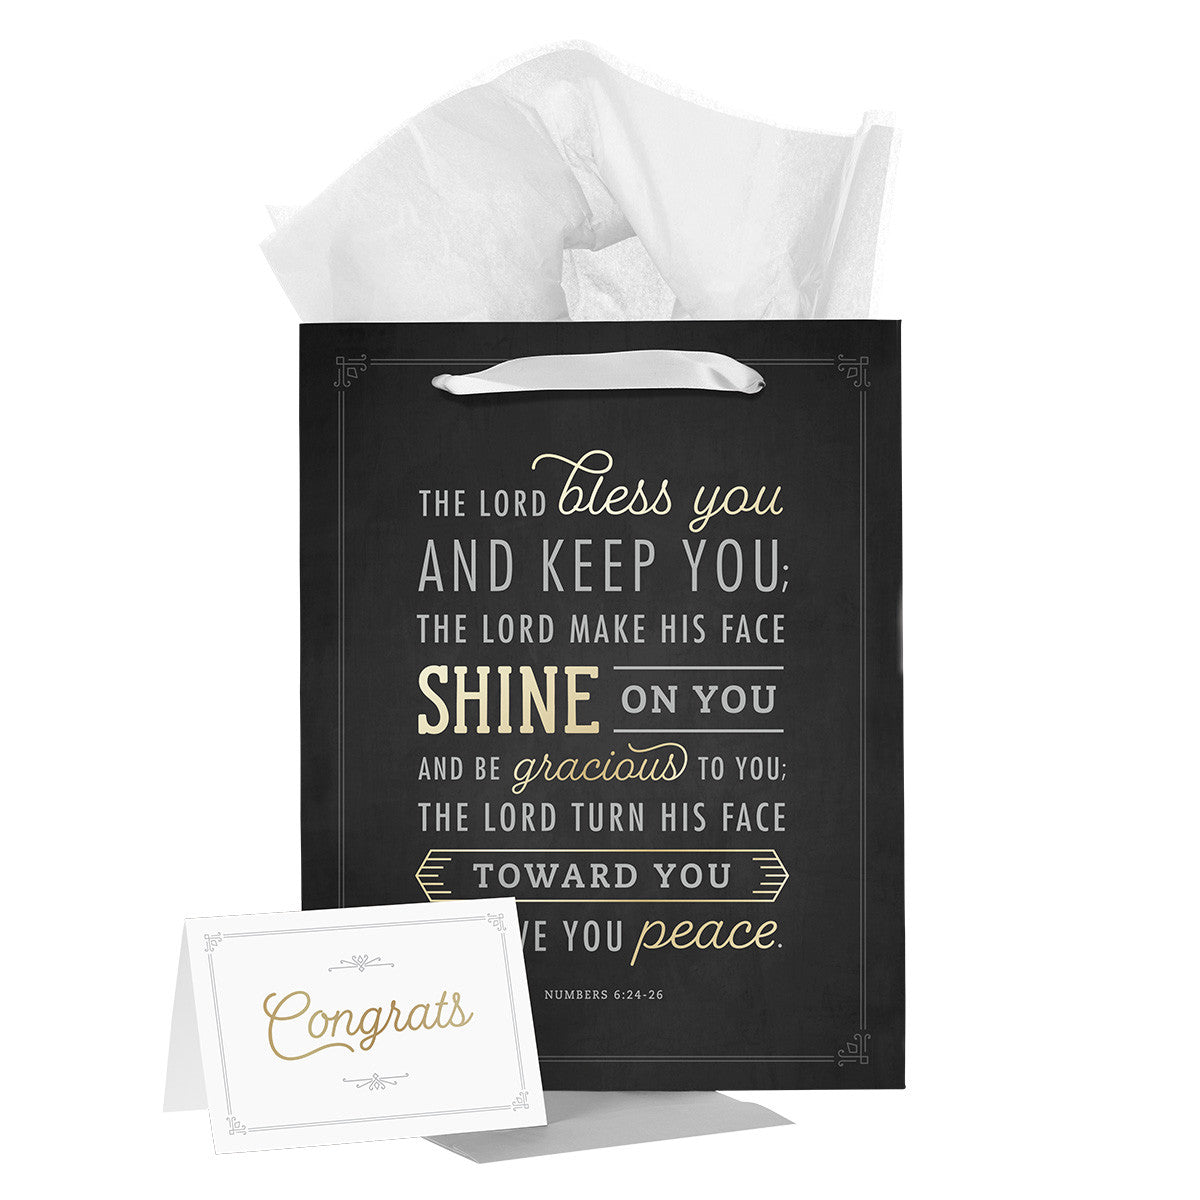 Bless You and Keep You Black and Gold Large Portrait Gift Bag with Card - Numbers 6:24-26